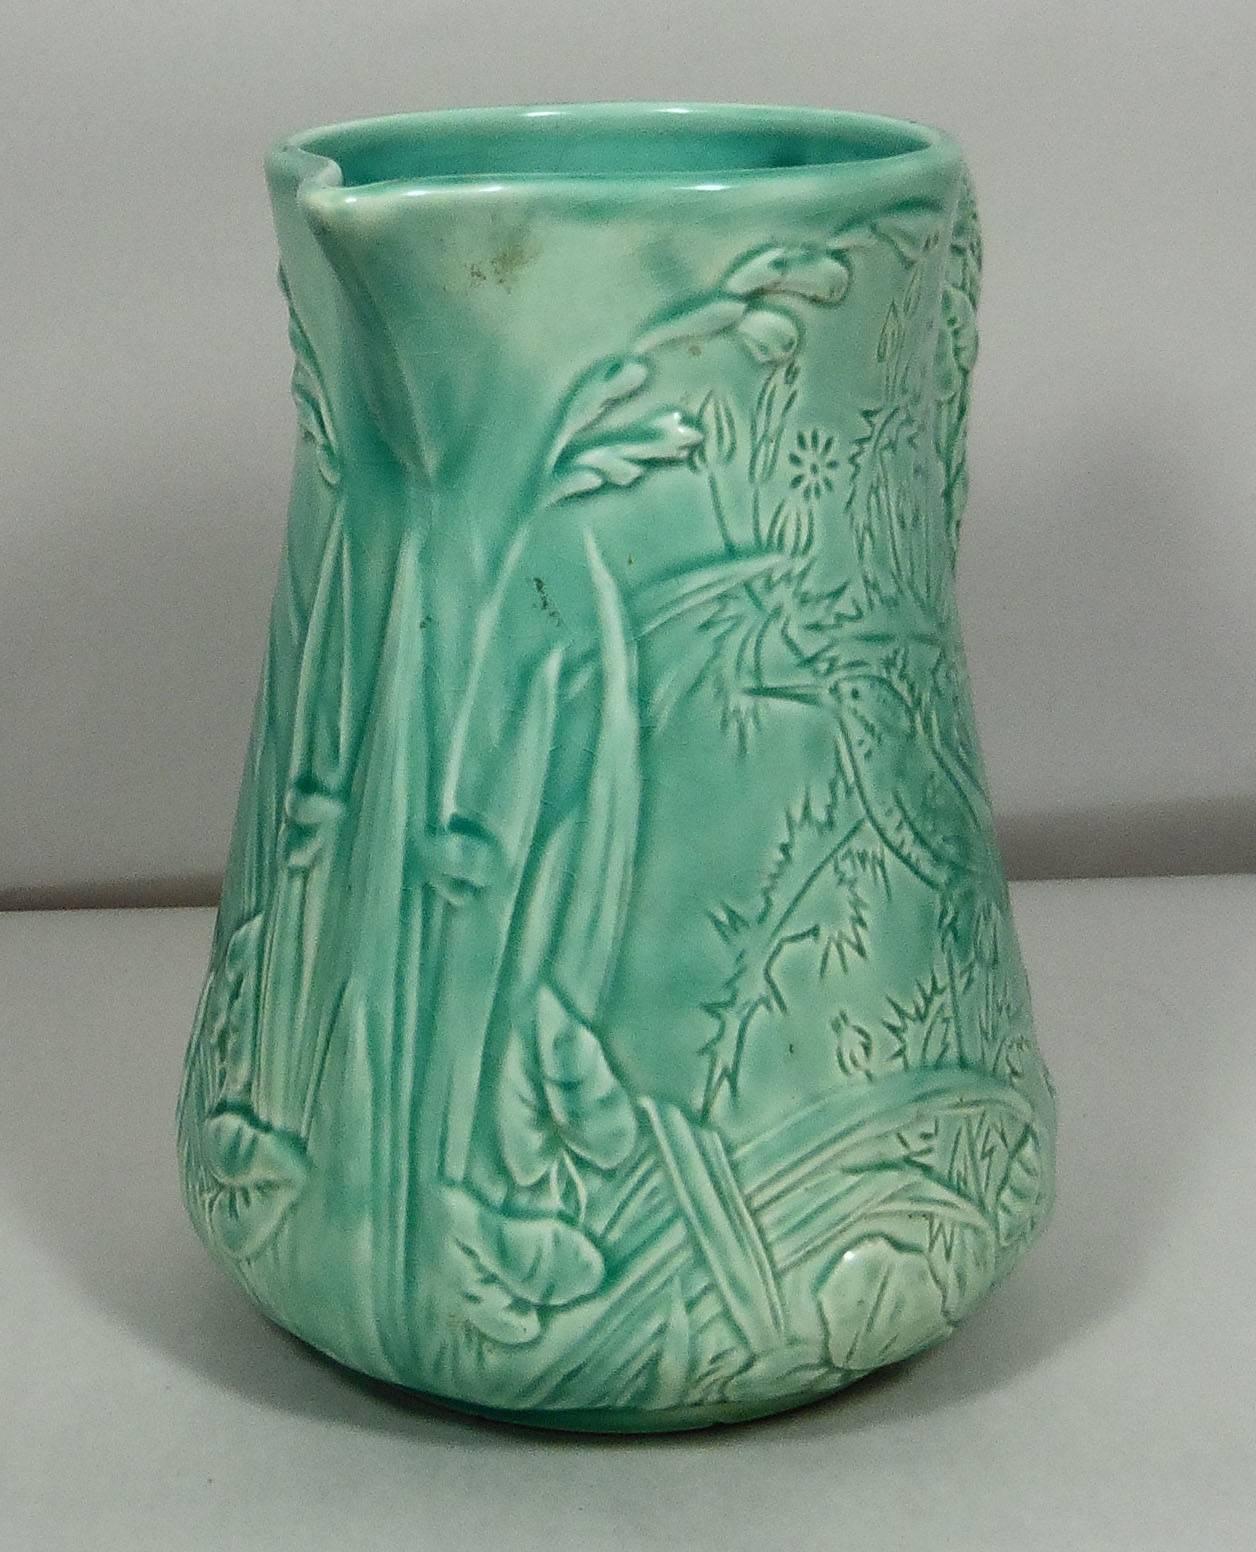 19th French Majolica aqua turquoise pitcher with birds, herbs, leaves and plants.